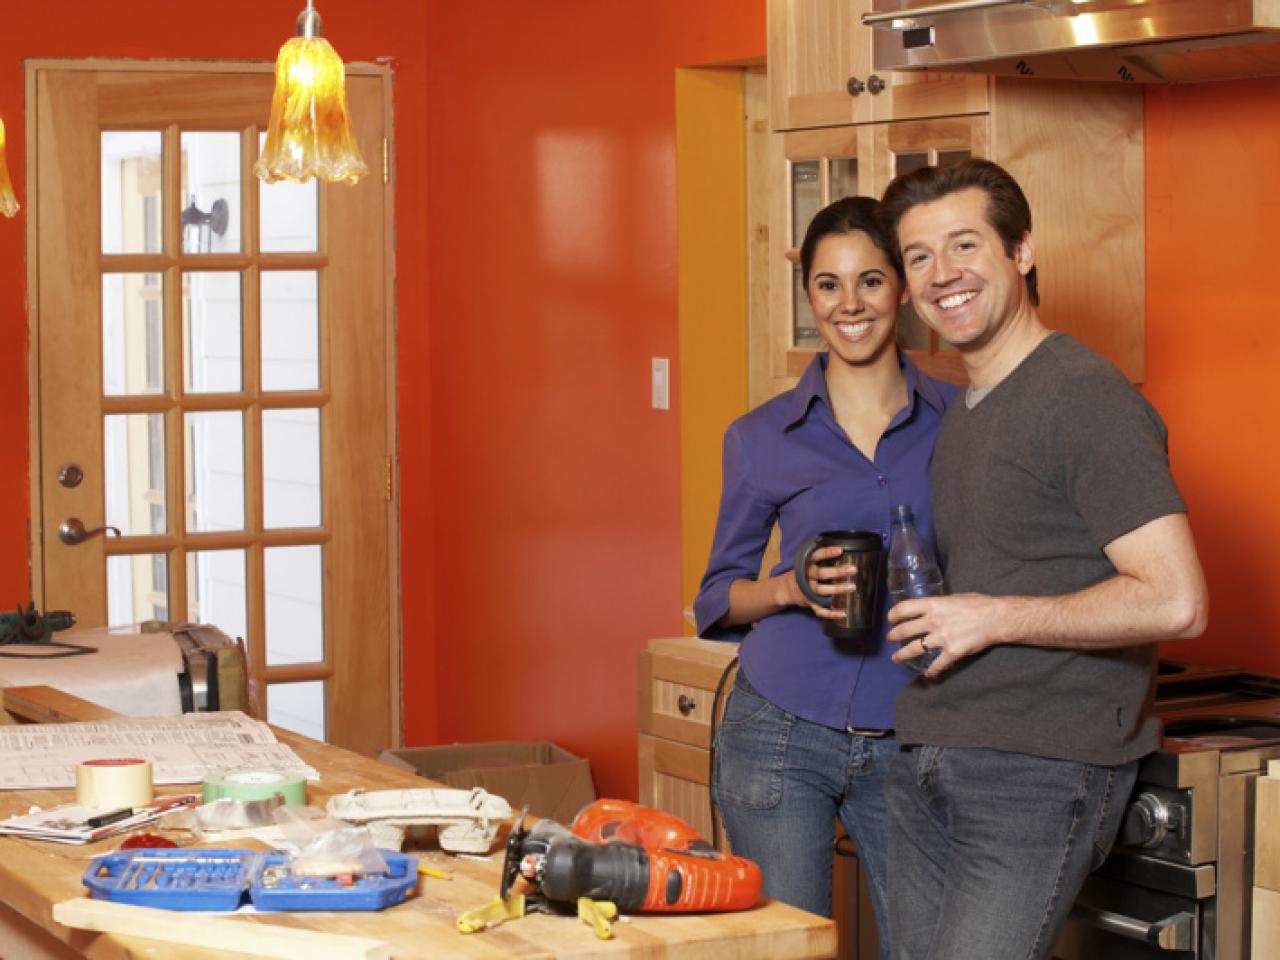  10 Steps to Budgeting for Your Kitchen Remodel